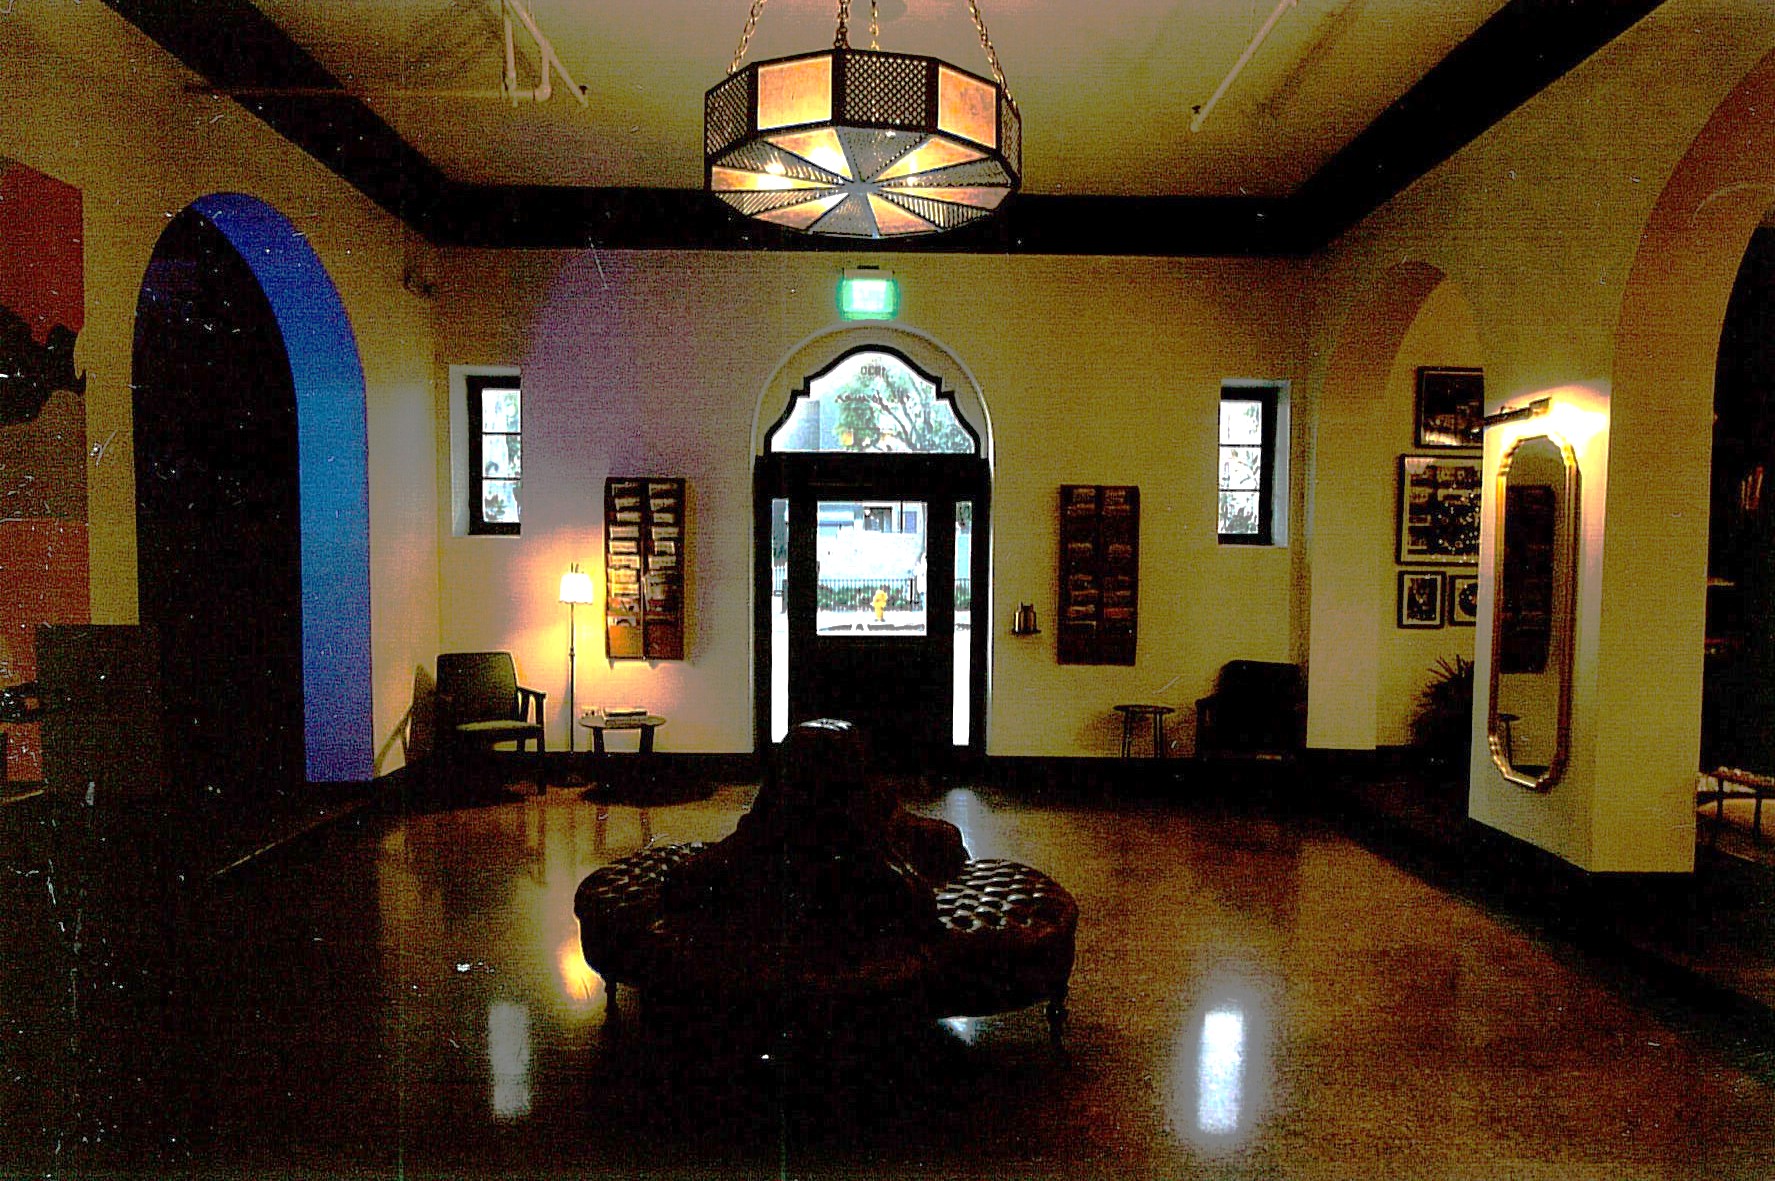 After Commodore Lobby